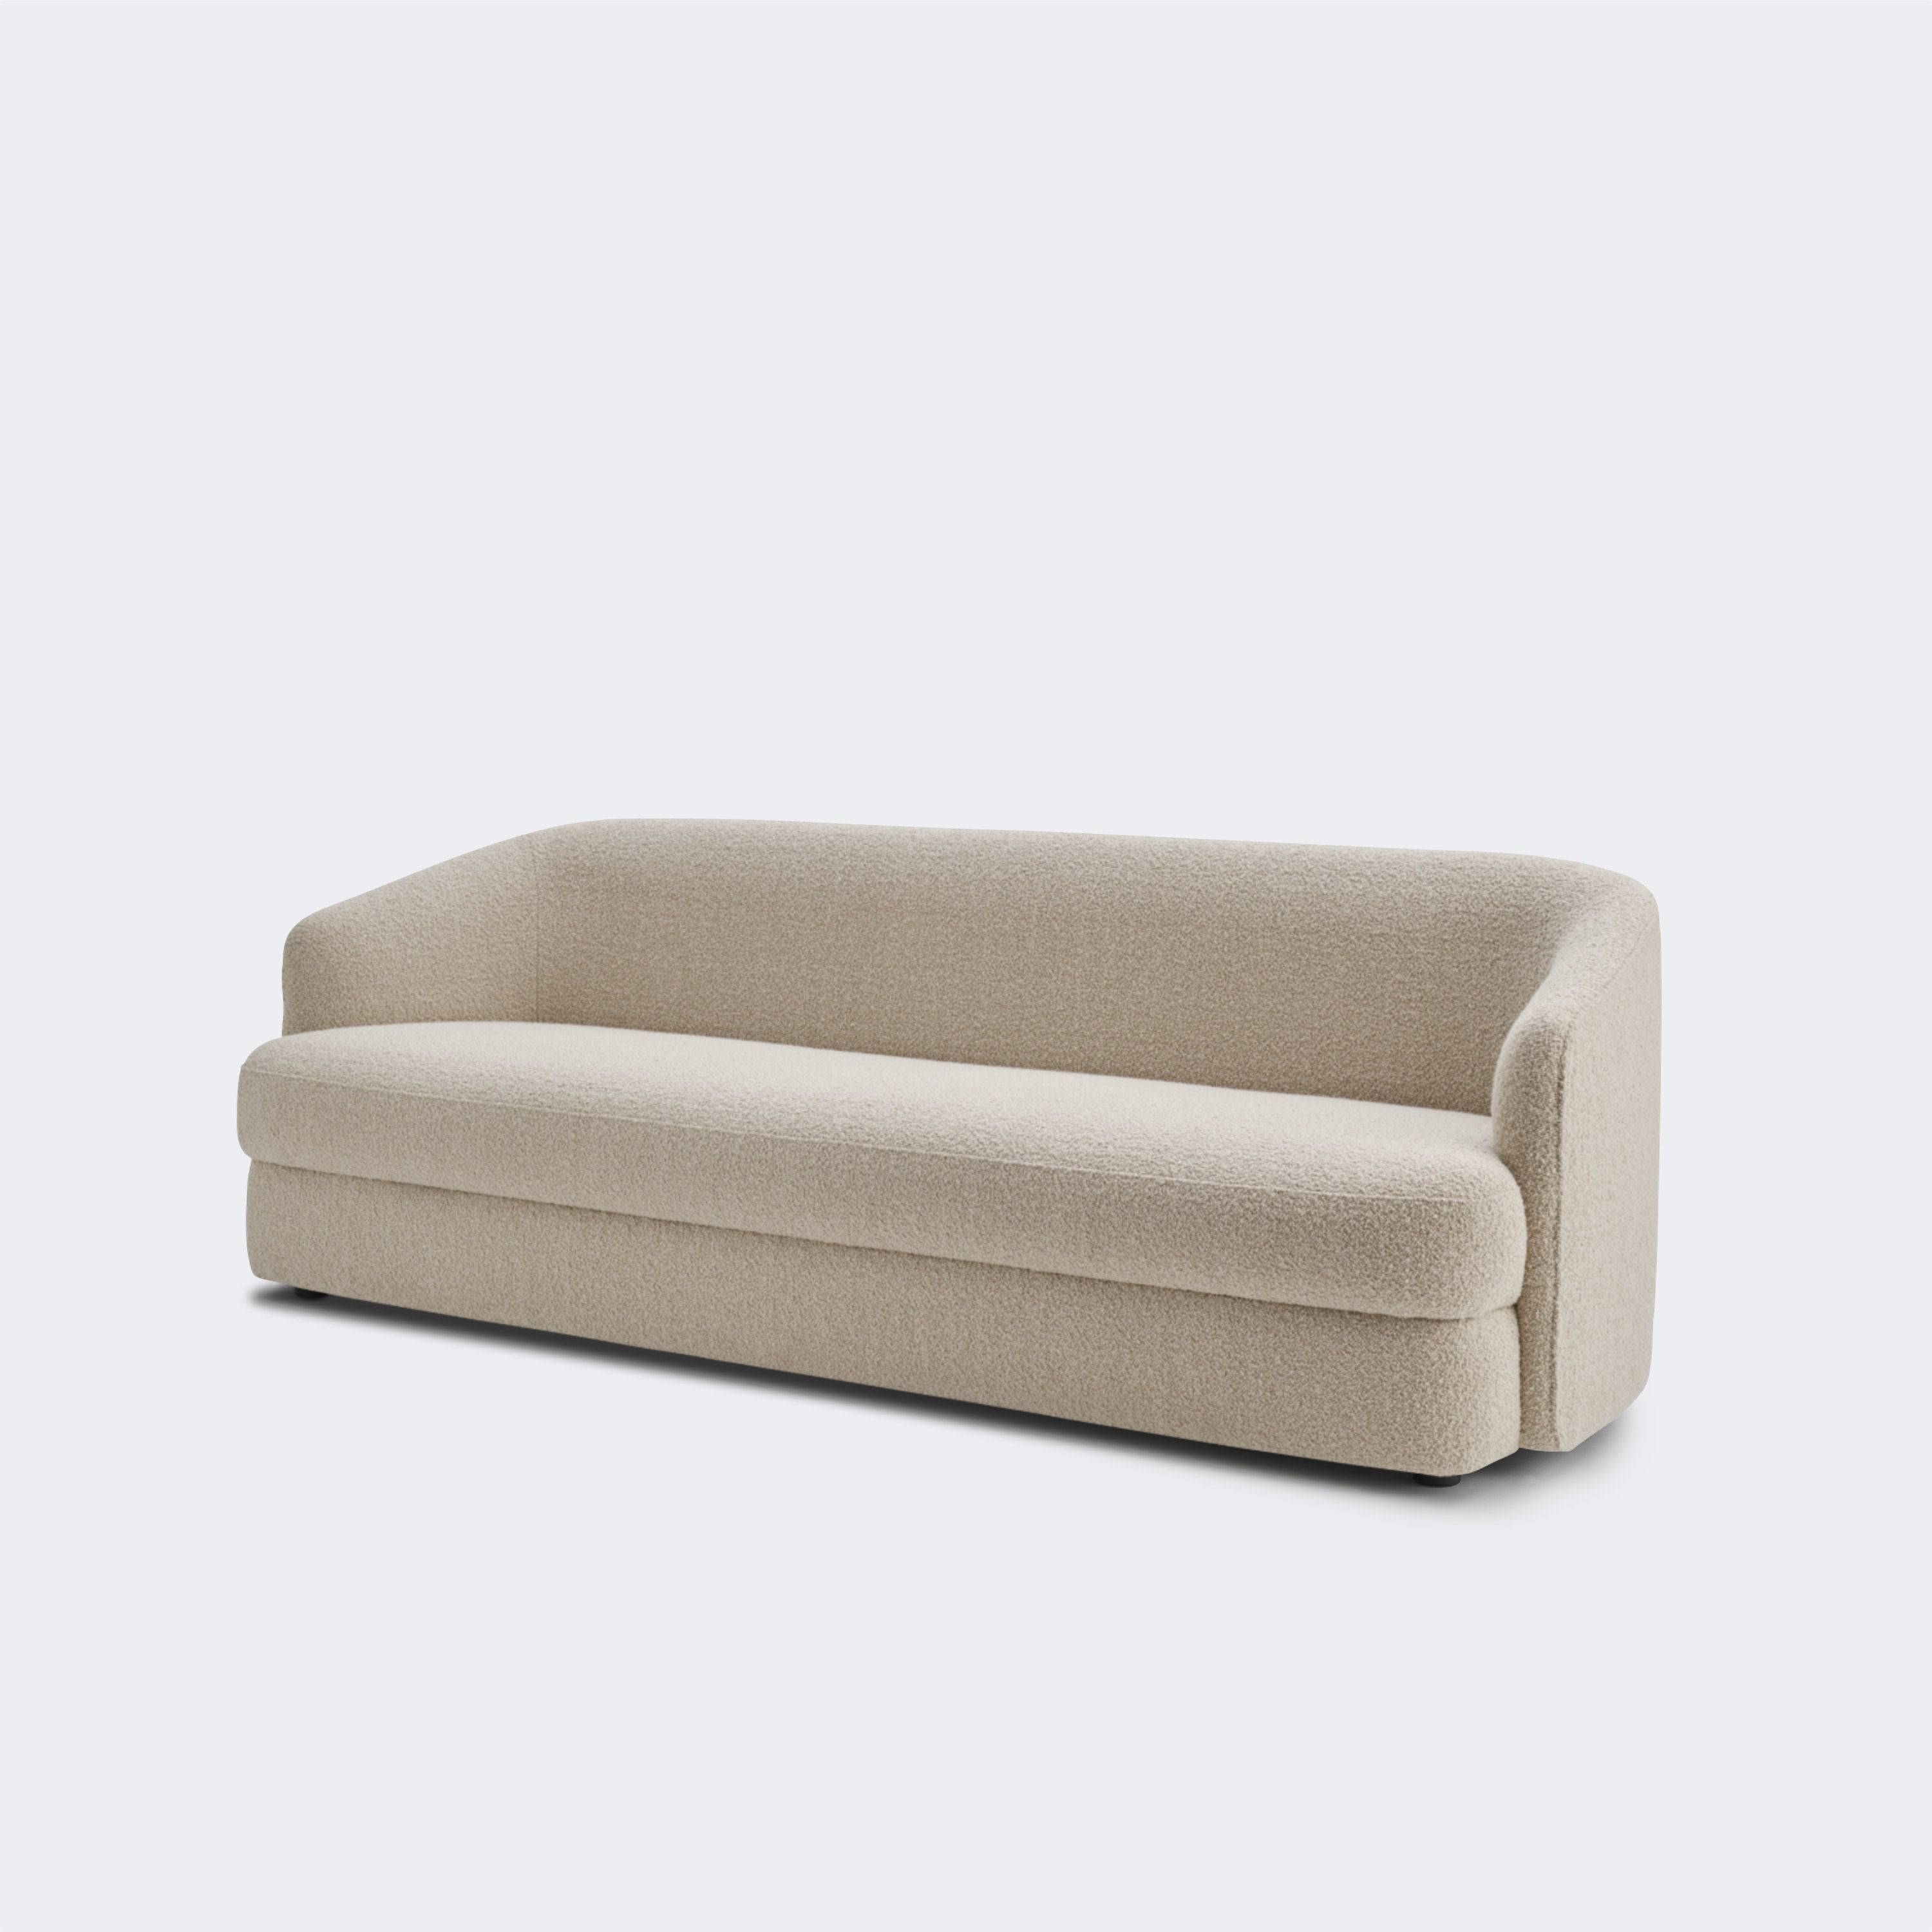 New Works Covent Sofa Deep, 3 Seater Made To Order (6-8 Weeks) Upholstery Price Category D - KANSO#Upholstery_Price Category D